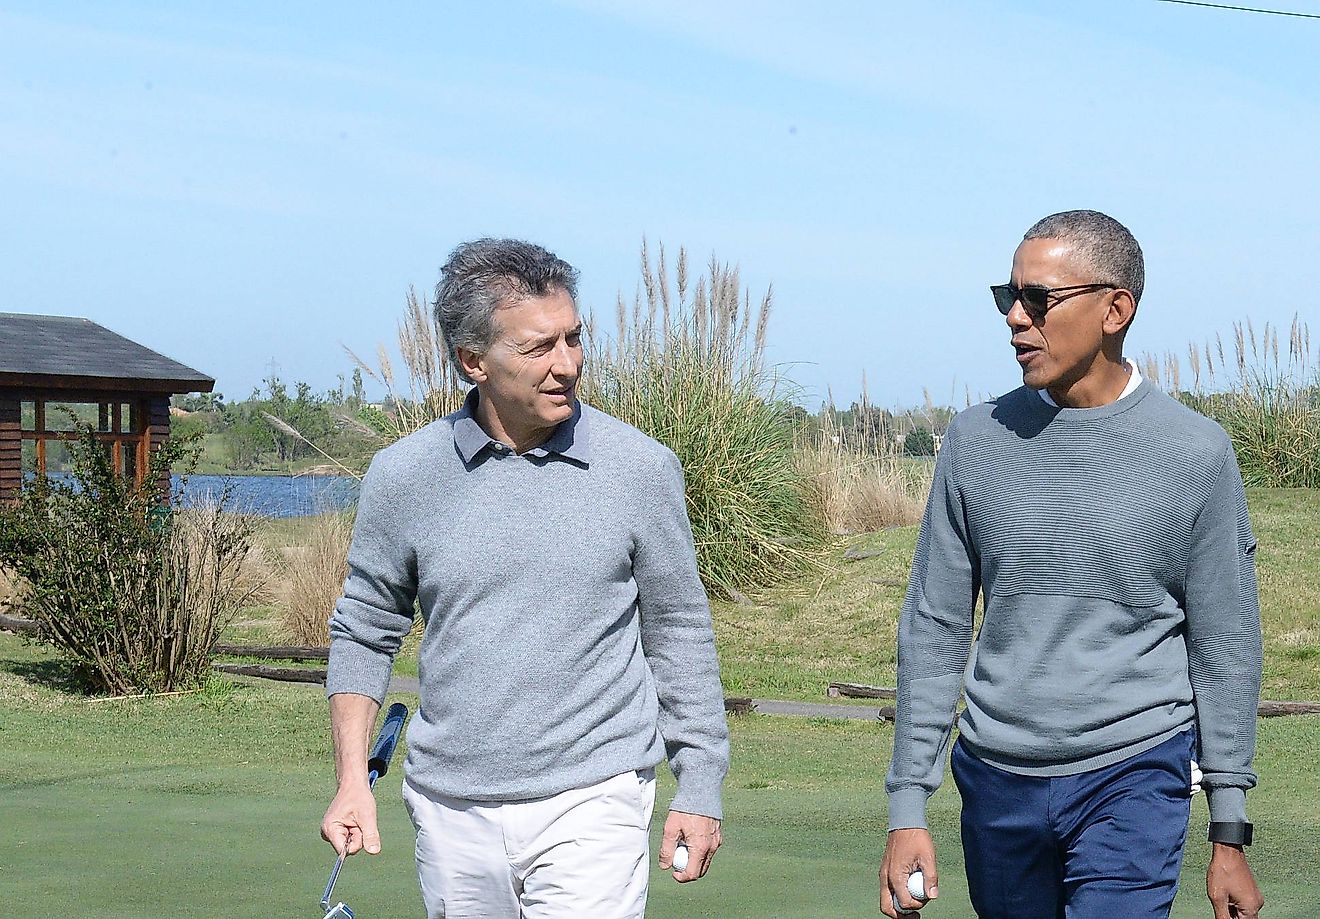 Obama playing golf with the President of Argentina Mauricio Macri, October 2017. Image credit: LavaBaron/Wikimedia.org